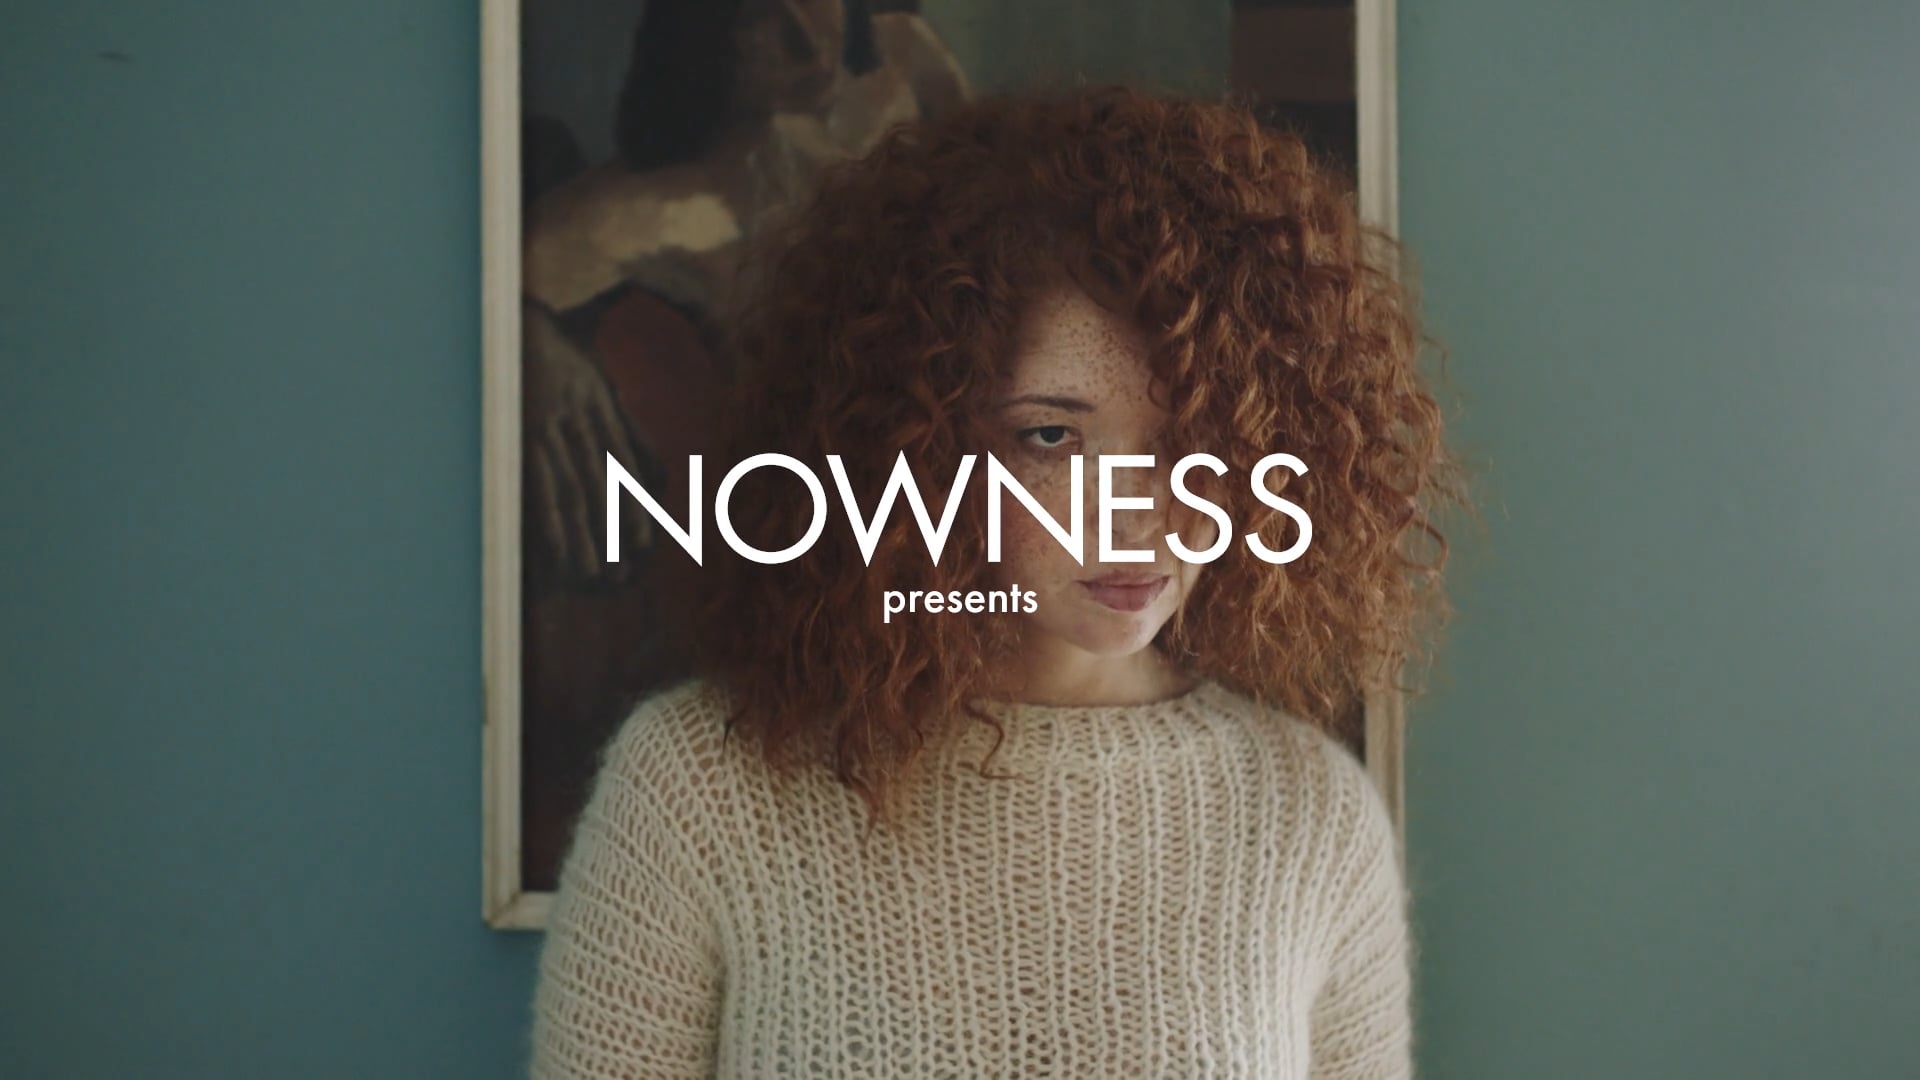 Nowness - Skin - Director's cut